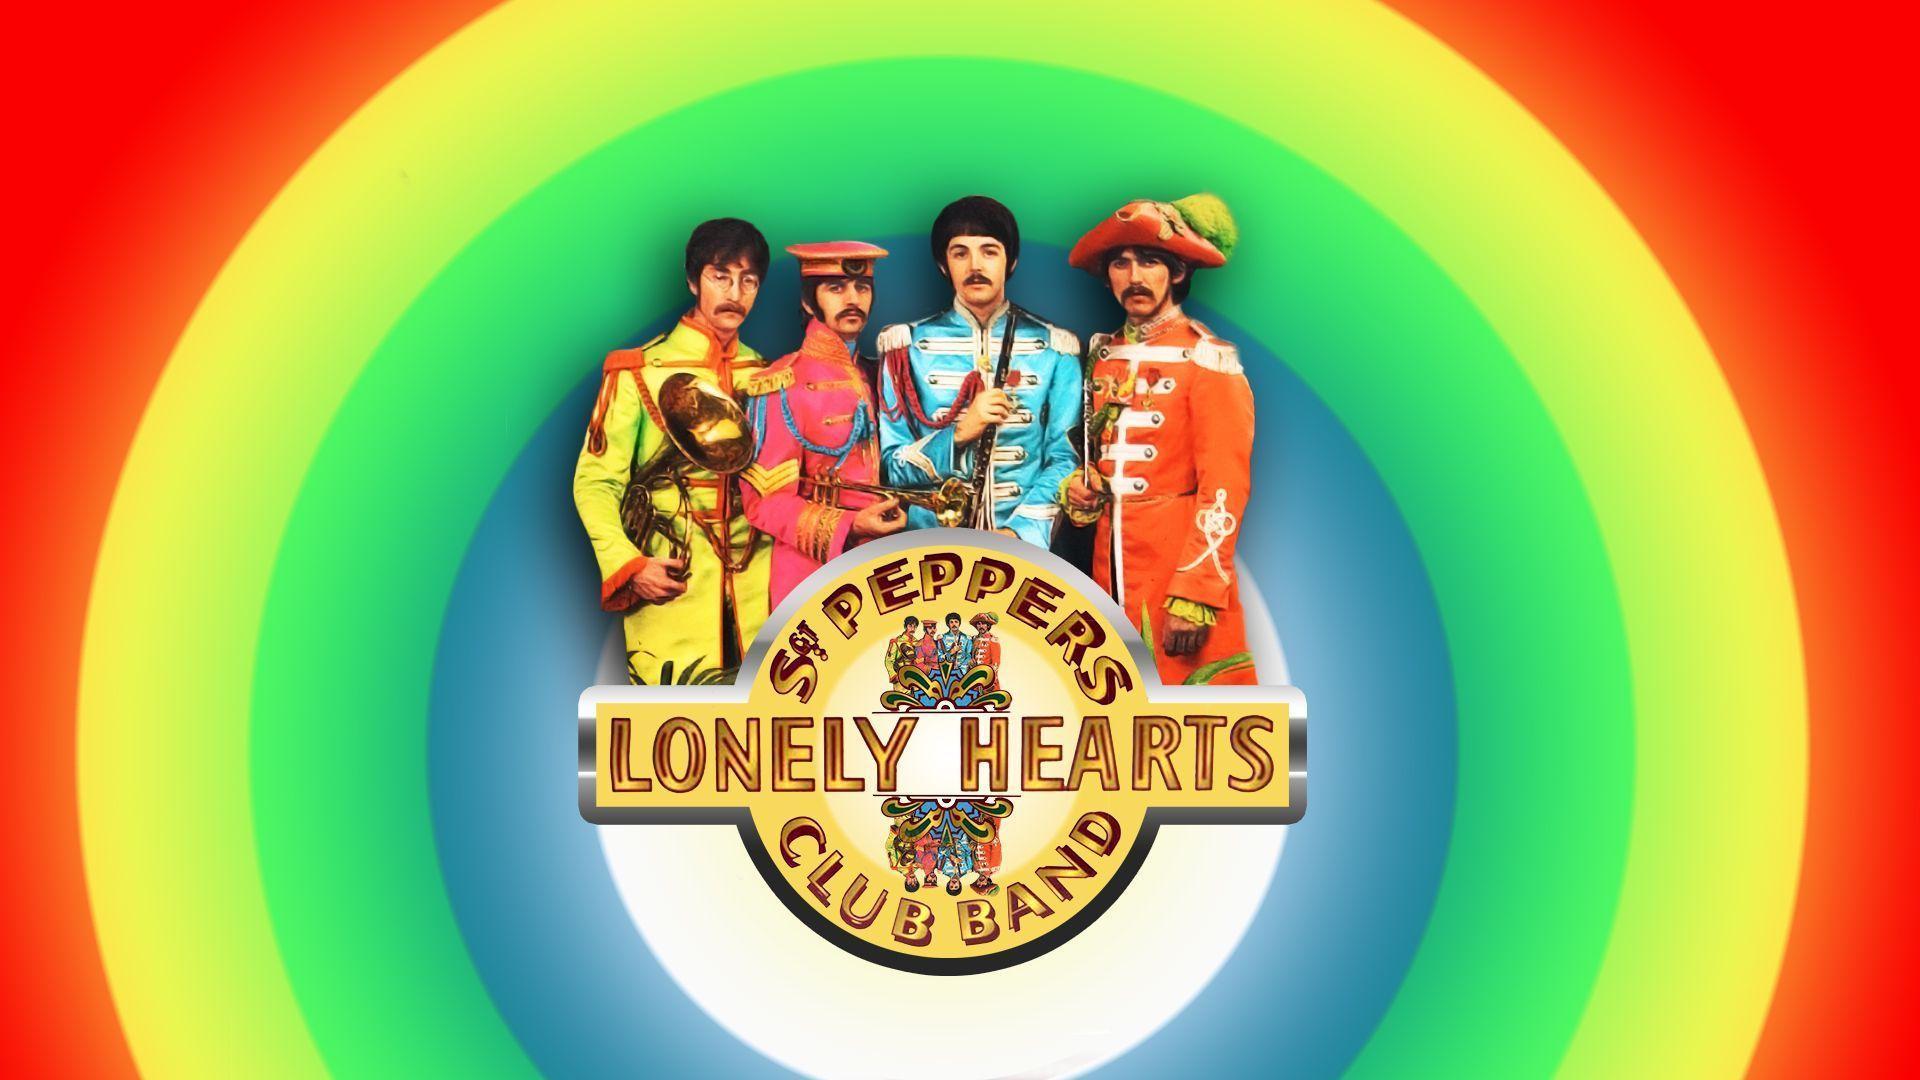 The Beatles Pepper&;s Lonely Hearts Club Band